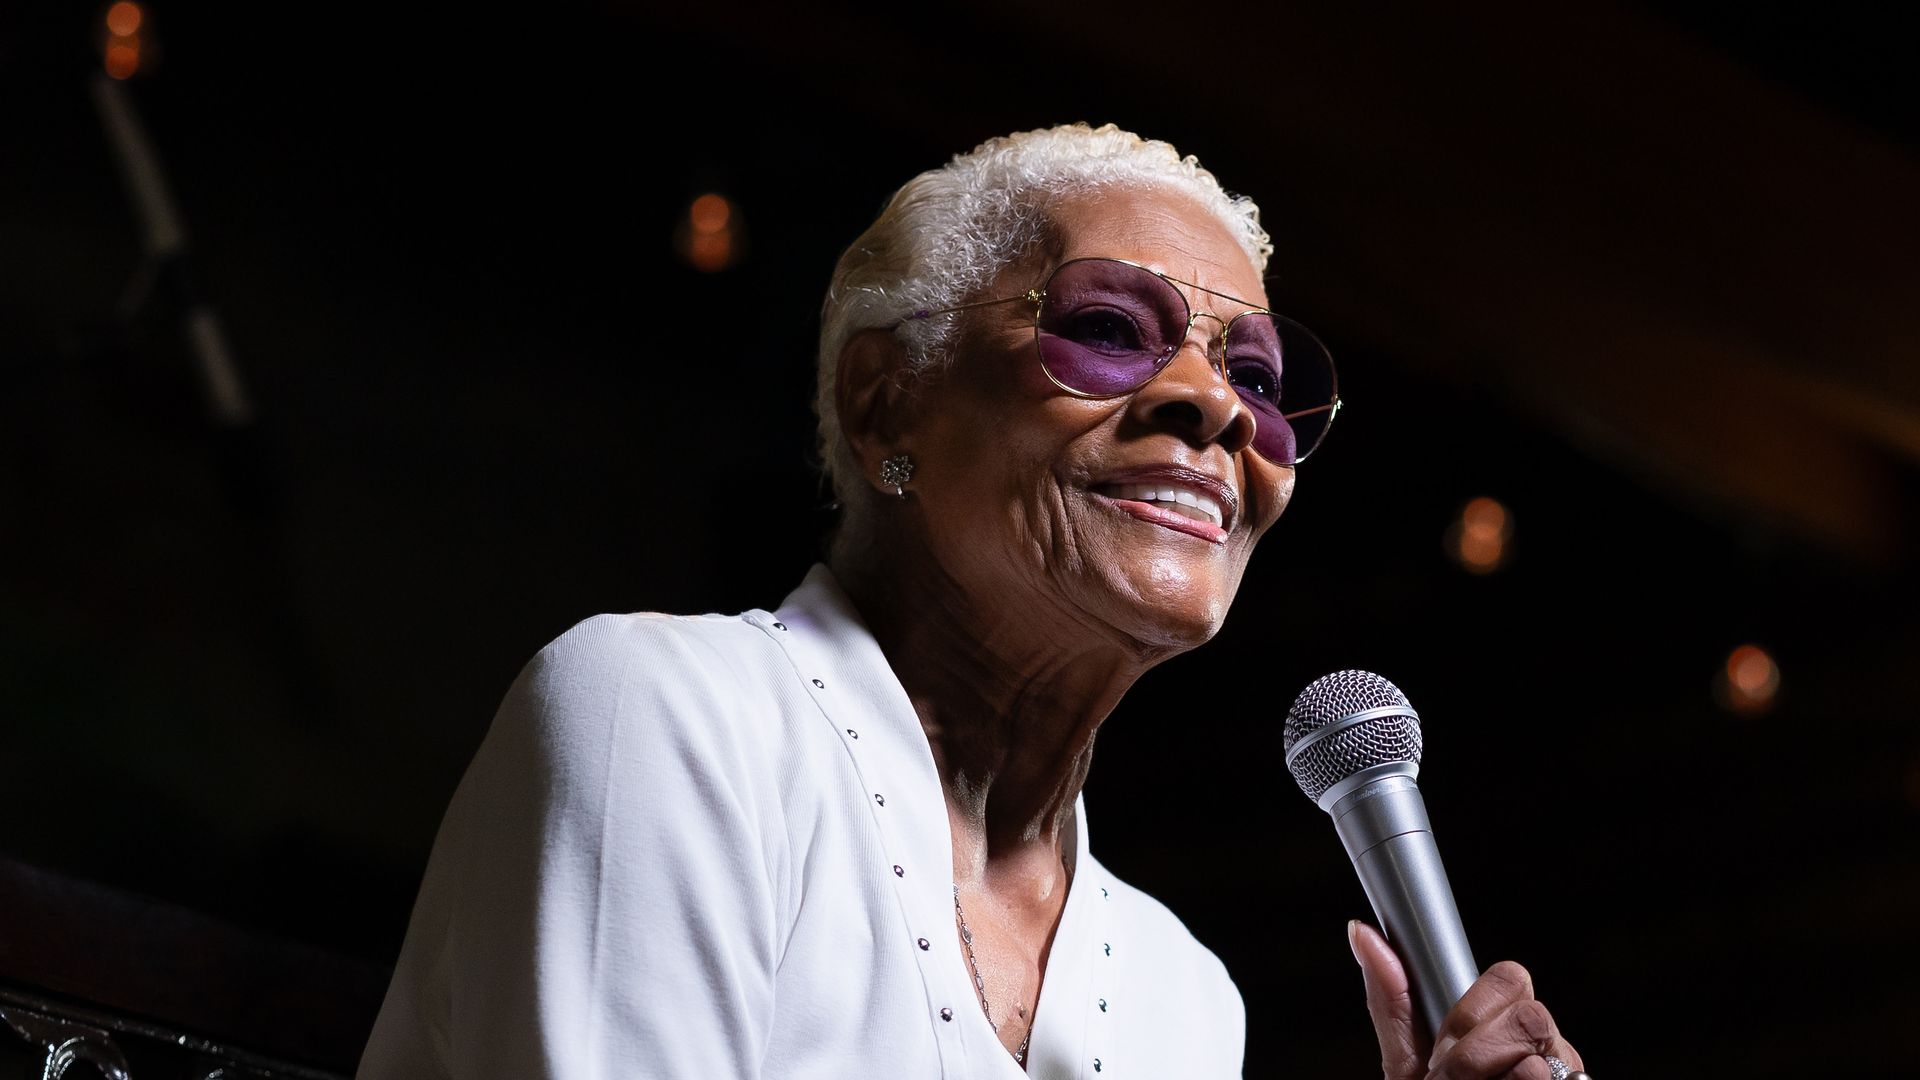 Dionne Warwick reveals her secret to happiness and fulfillment at age 82